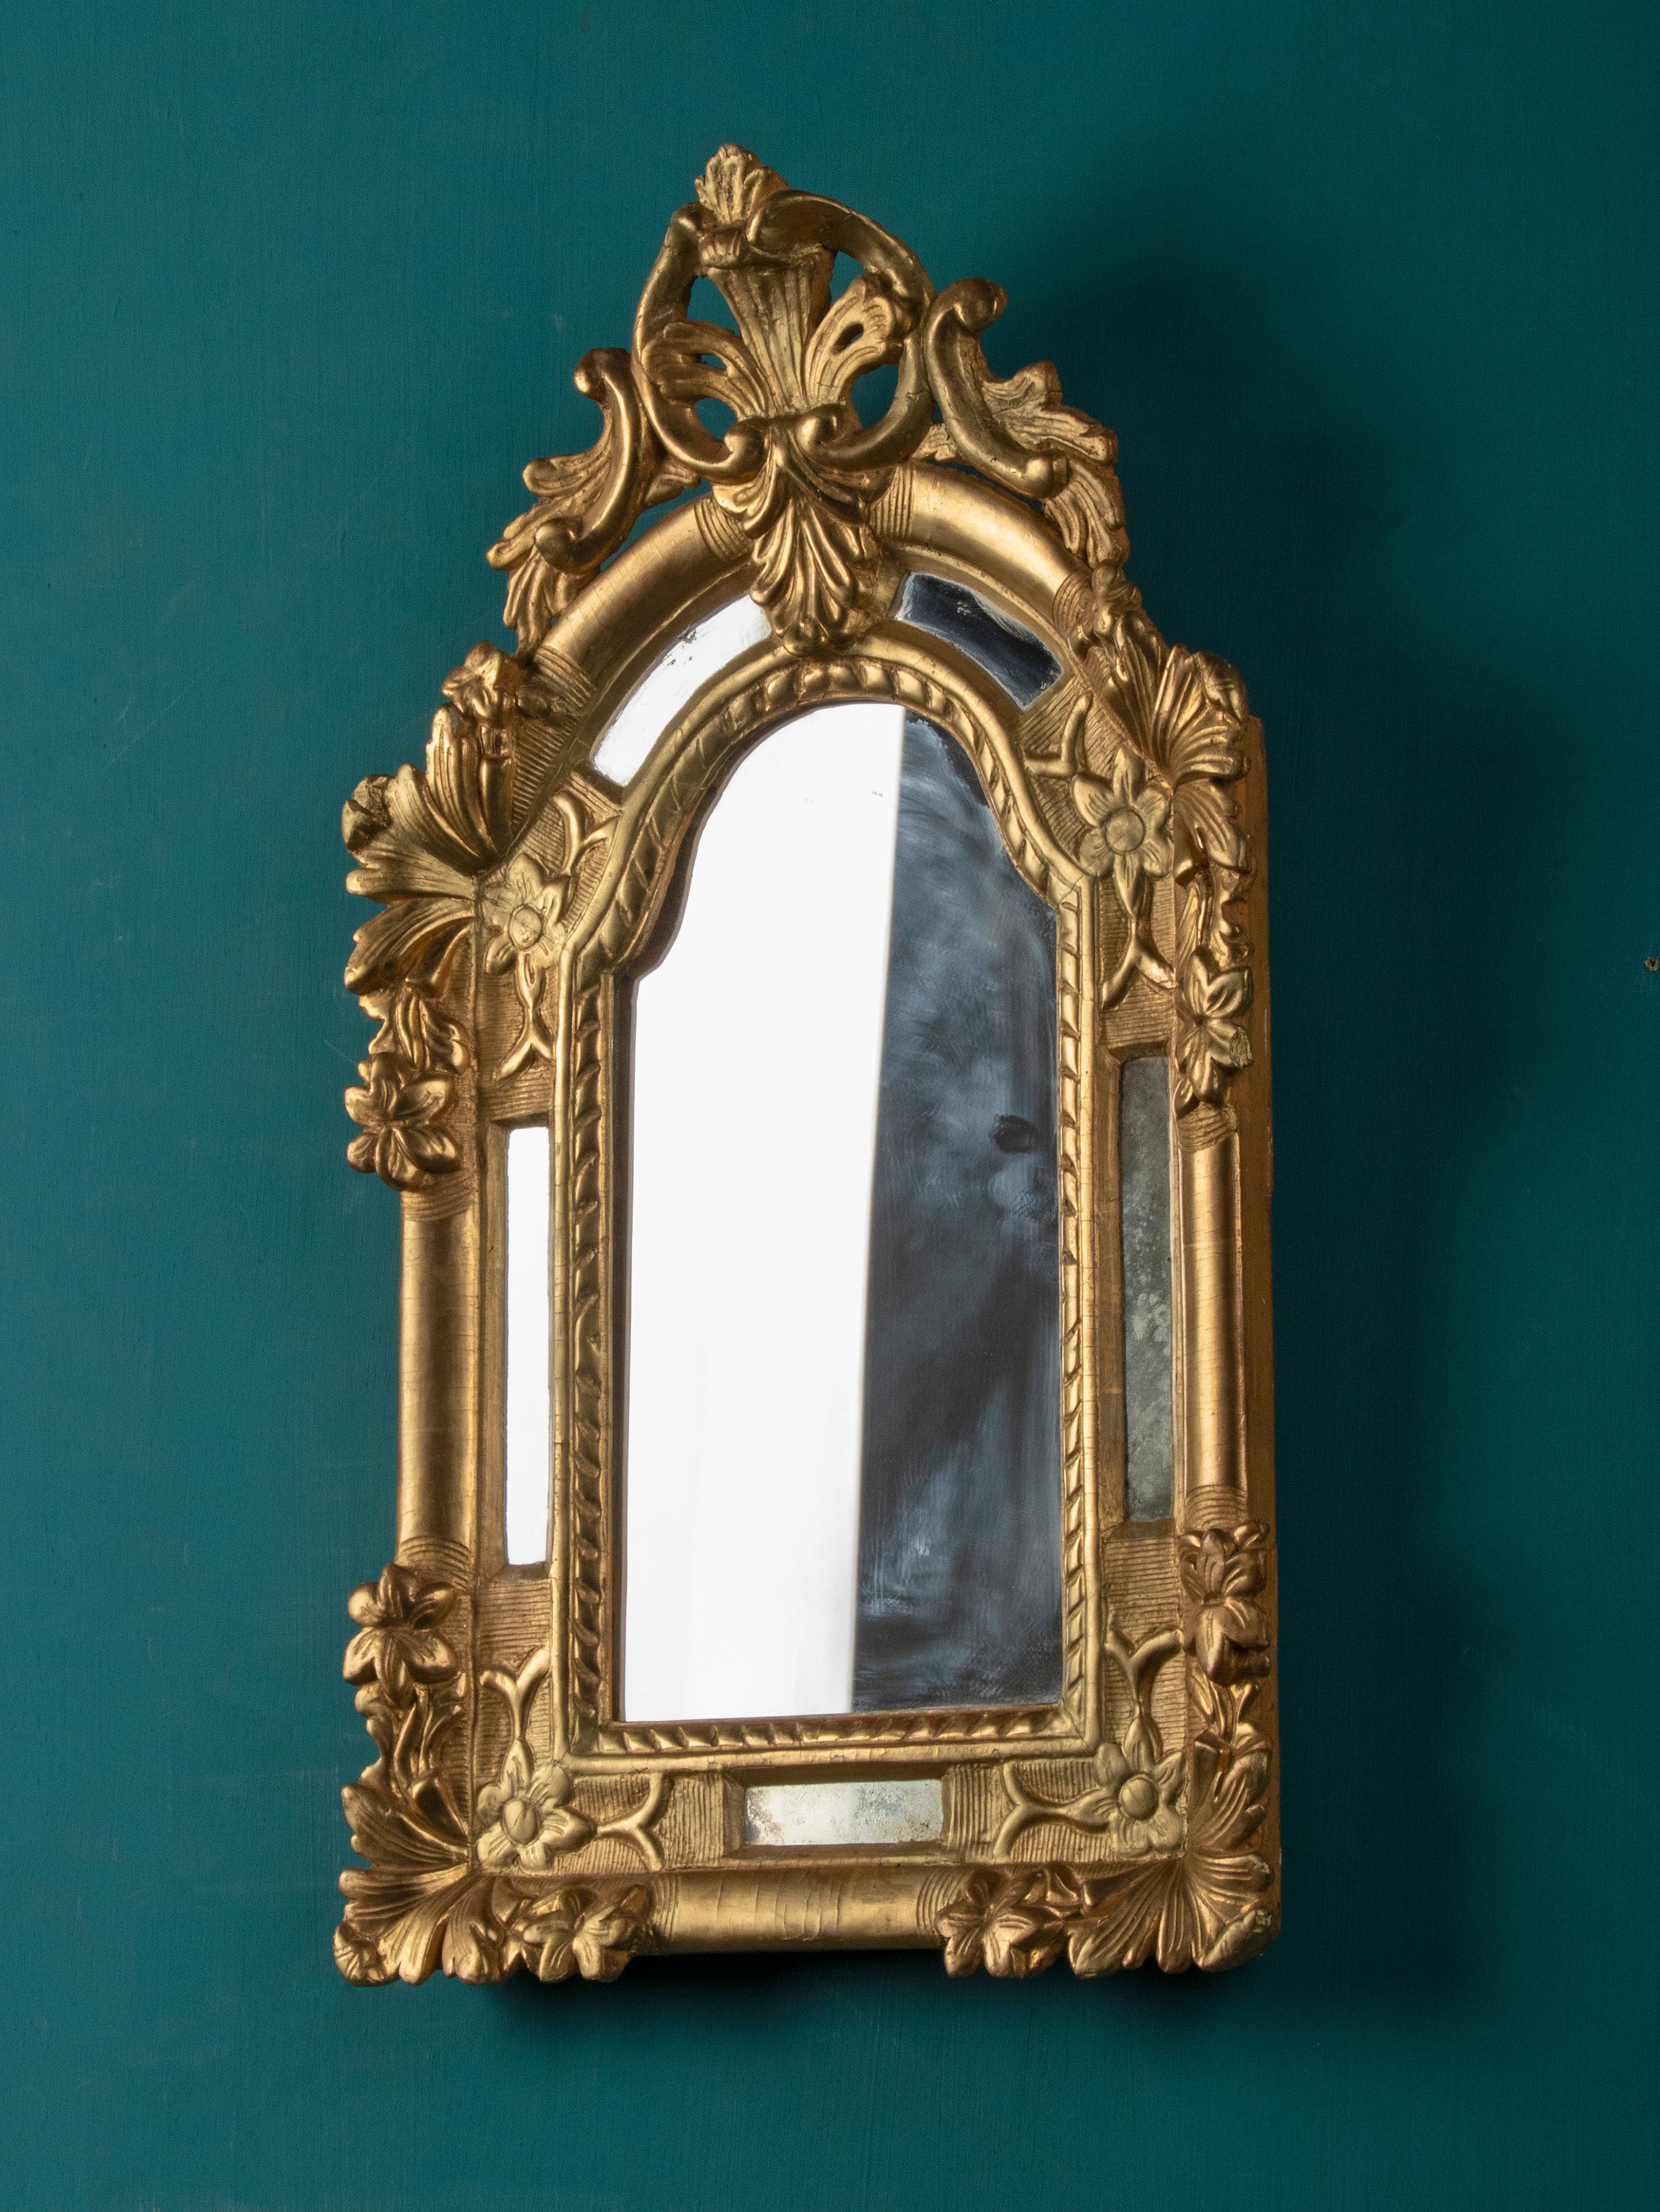 A small and elegant Louis XV Style French Wall mirror with floral decor. The mirror is made of carved wood. It has small mirror glasses on the sides. This model is also called 